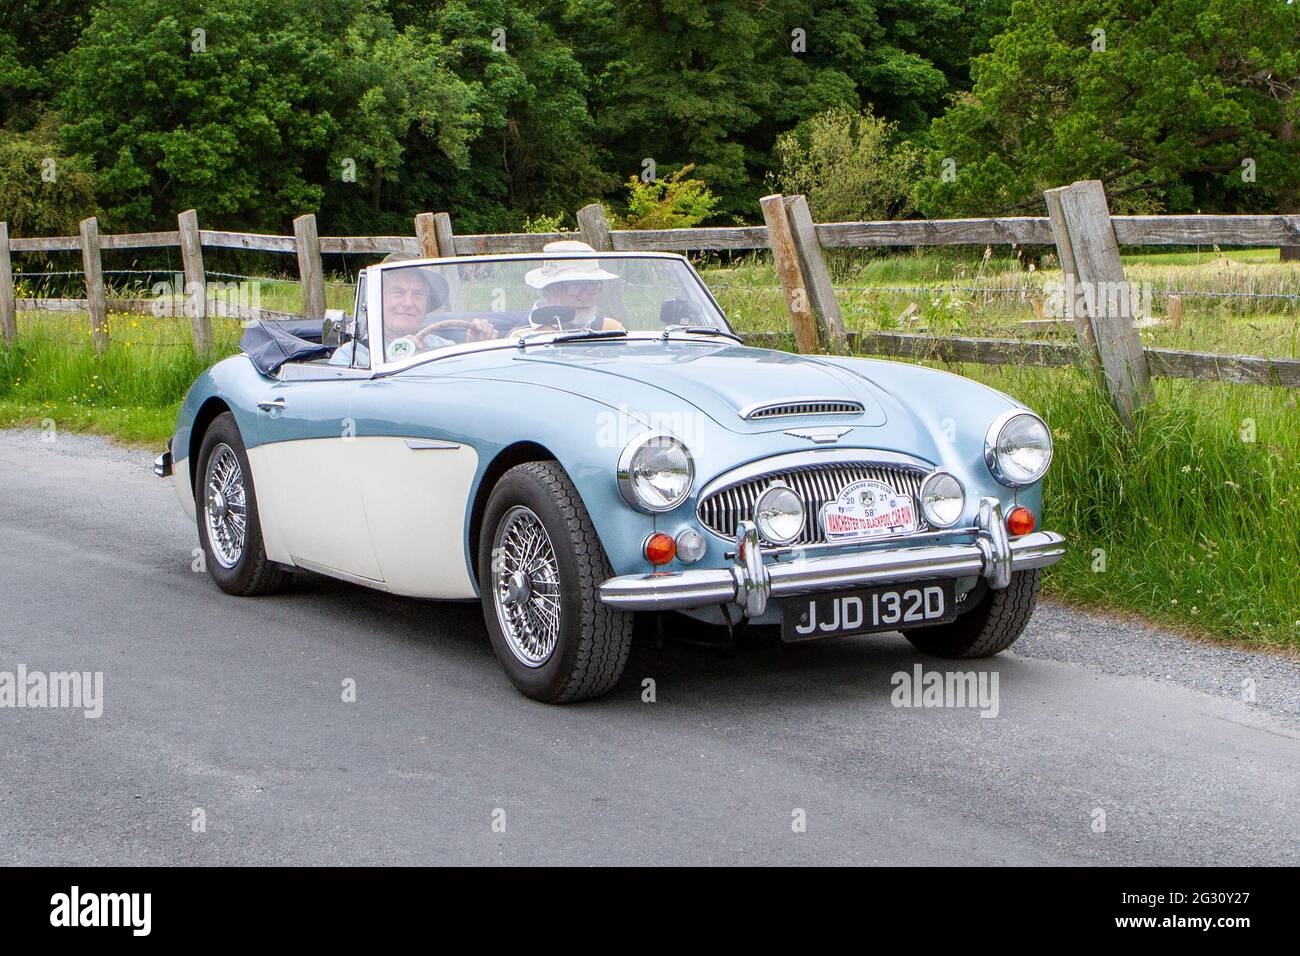 1966 60s blue white Austin Healey 3000cc petrol car at the 58th Annual Manchester to Blackpool Vintage & Classic Car Run a ‘Touring Assembly’ event UK Stock Photo